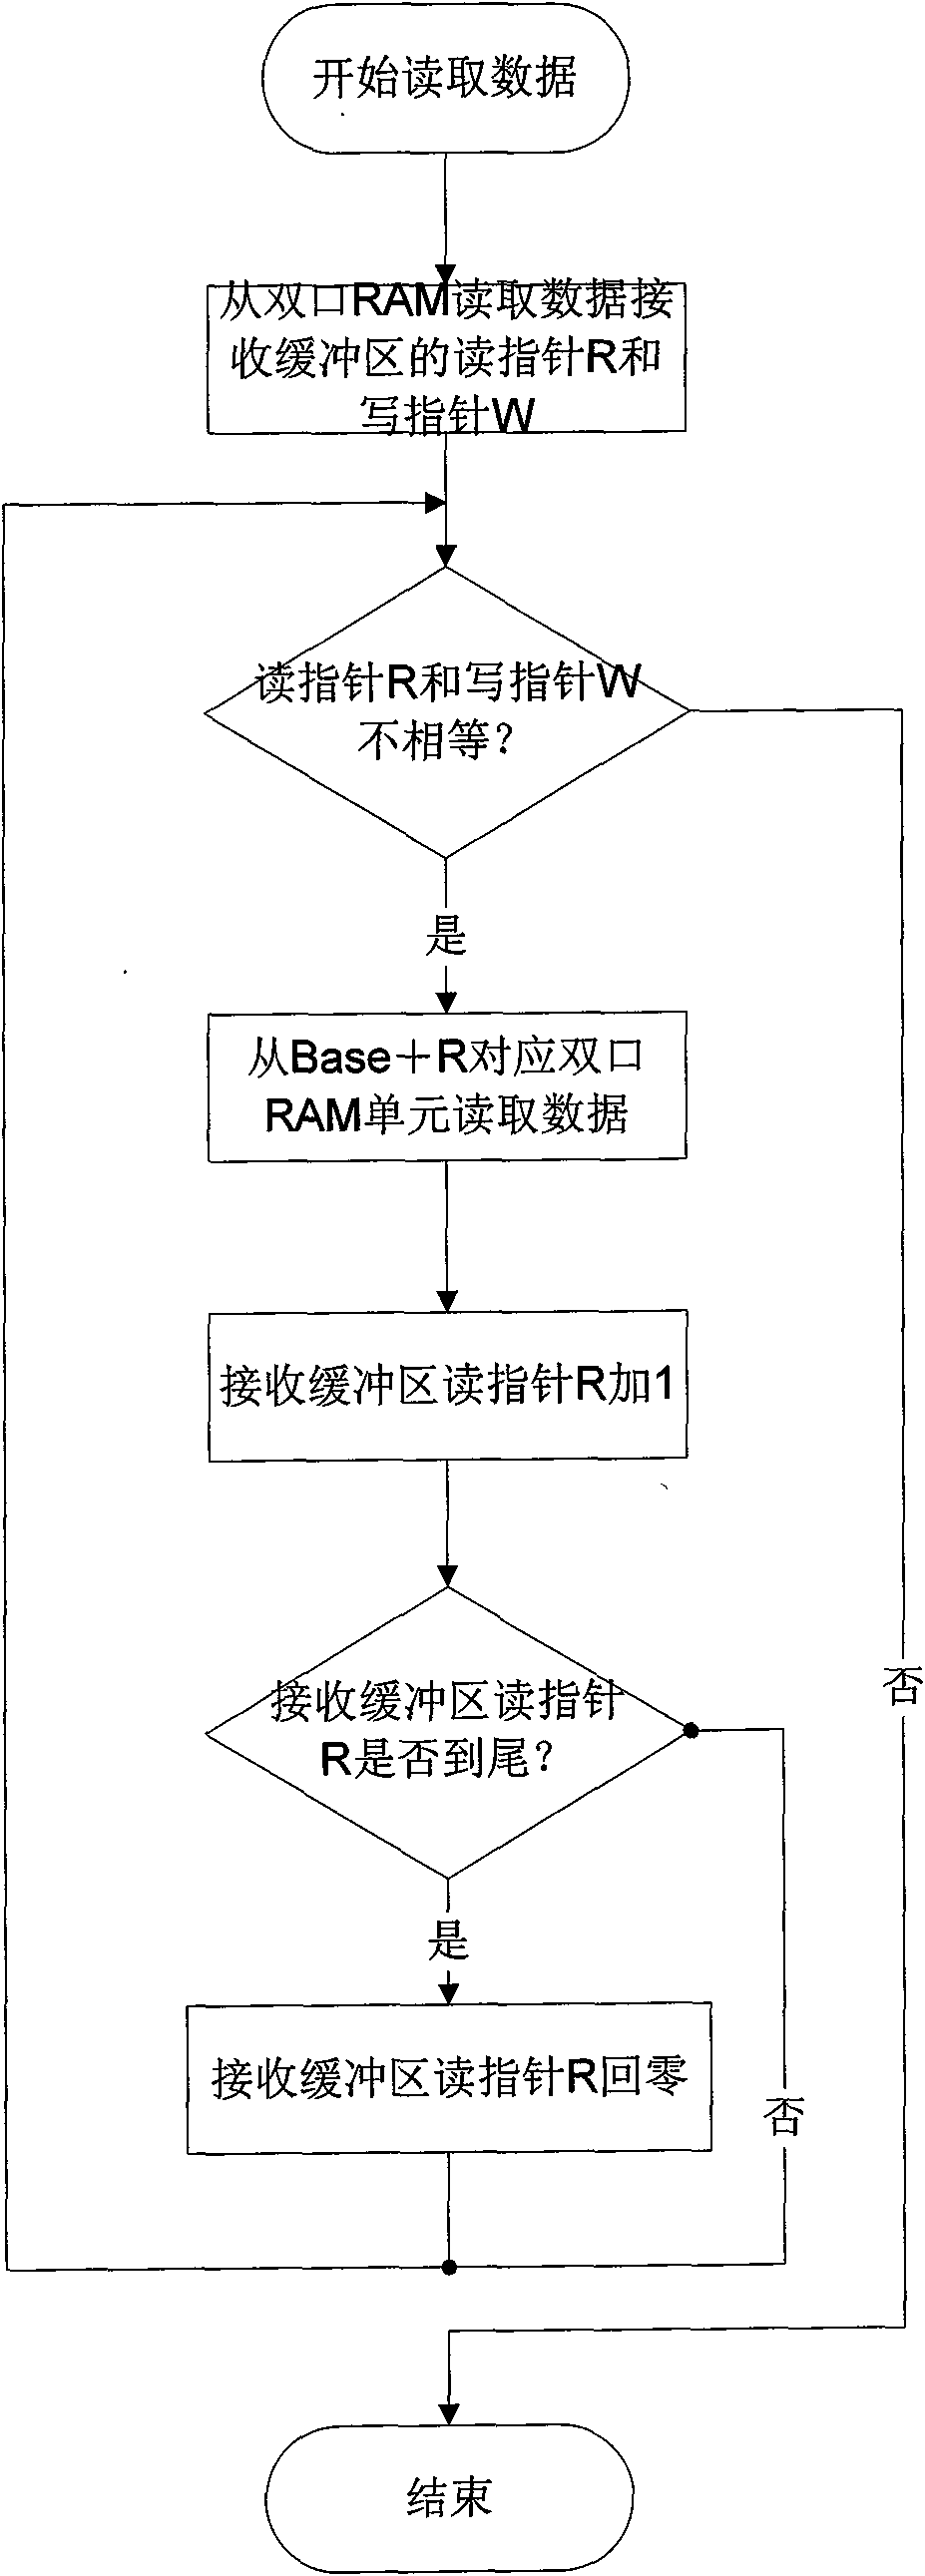 Implementation method of double-port RAM mutual exclusion access